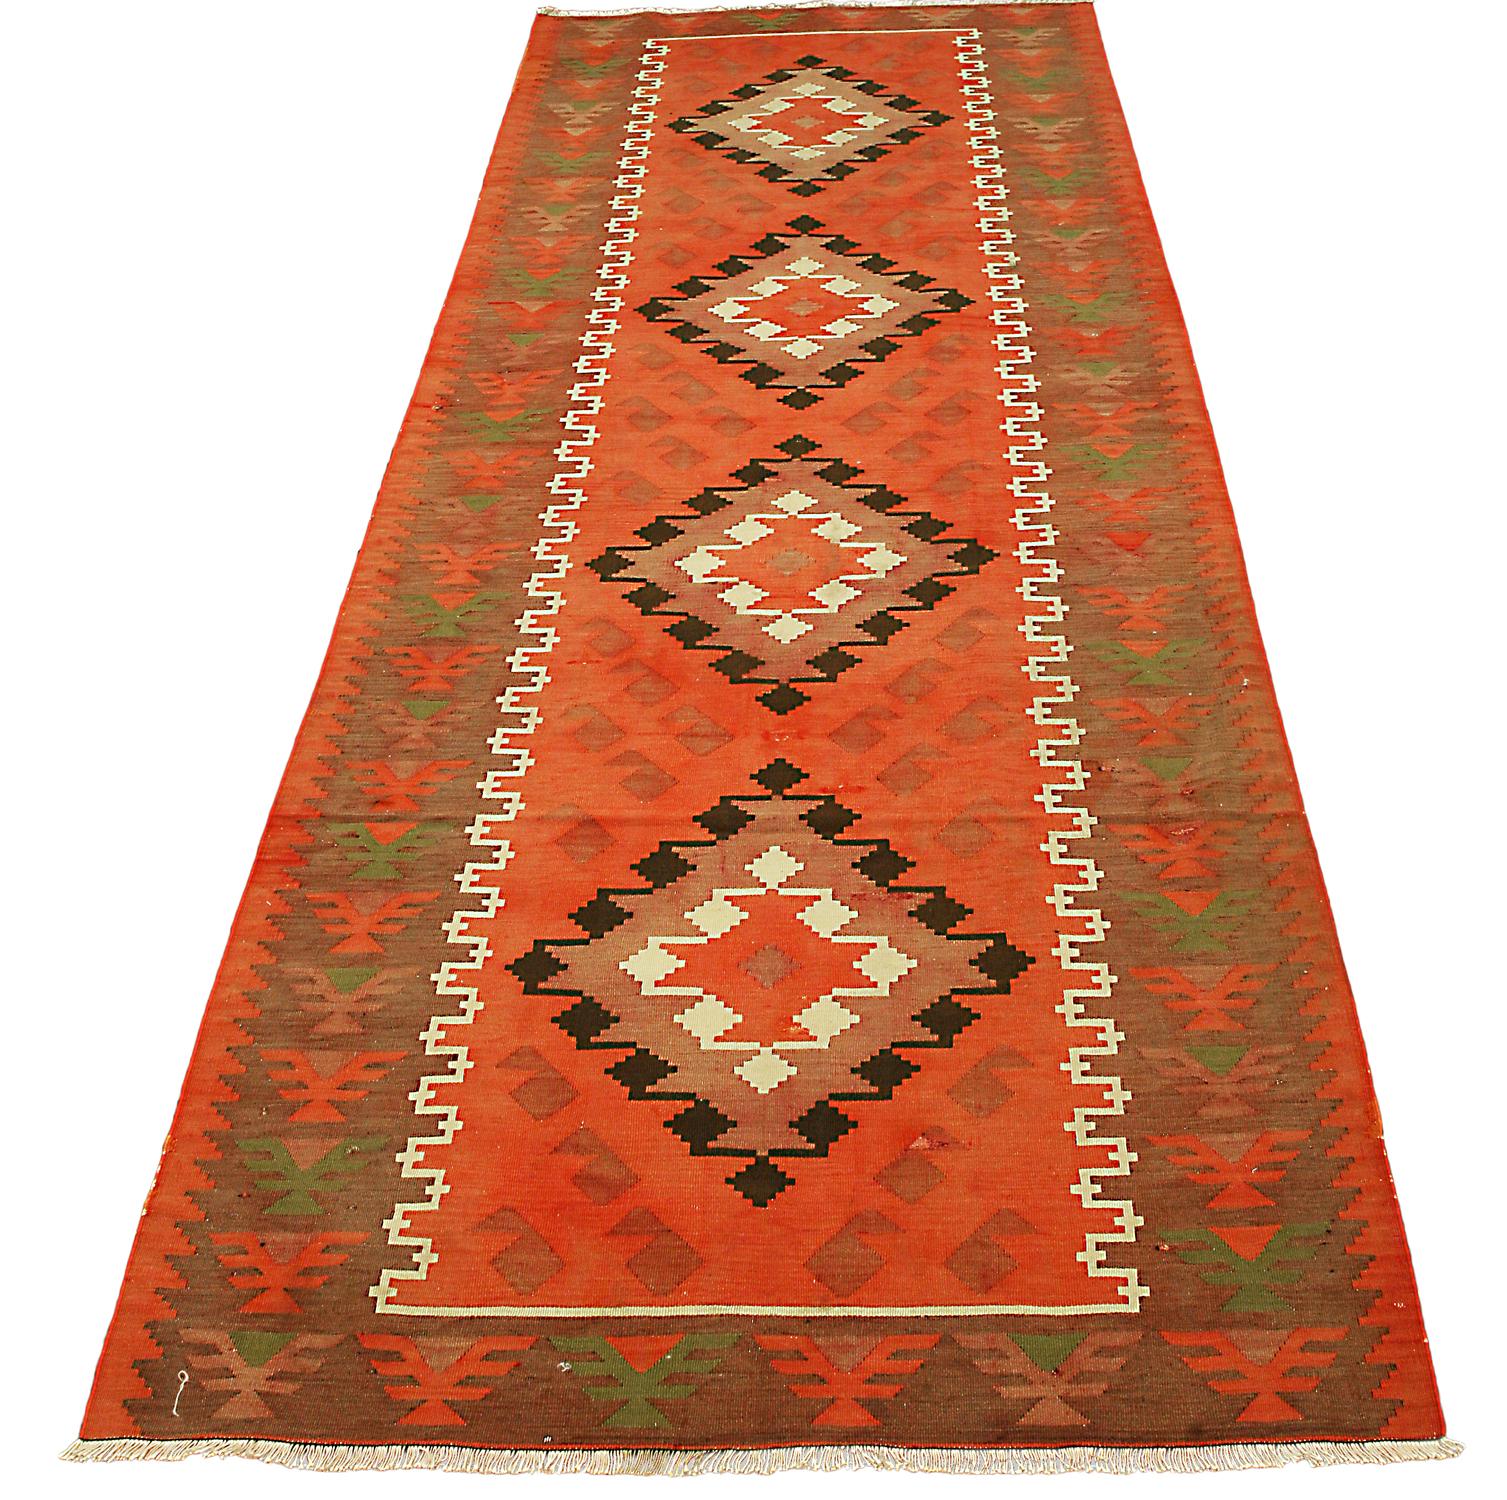 This is a semi-antique Caucasian Karabagh kilim runner woven during the second quarter of the 20th century circa 1940 and measures 288 x 102 CM in size. This piece has a highly geometric design with a center row of four repeating medallions